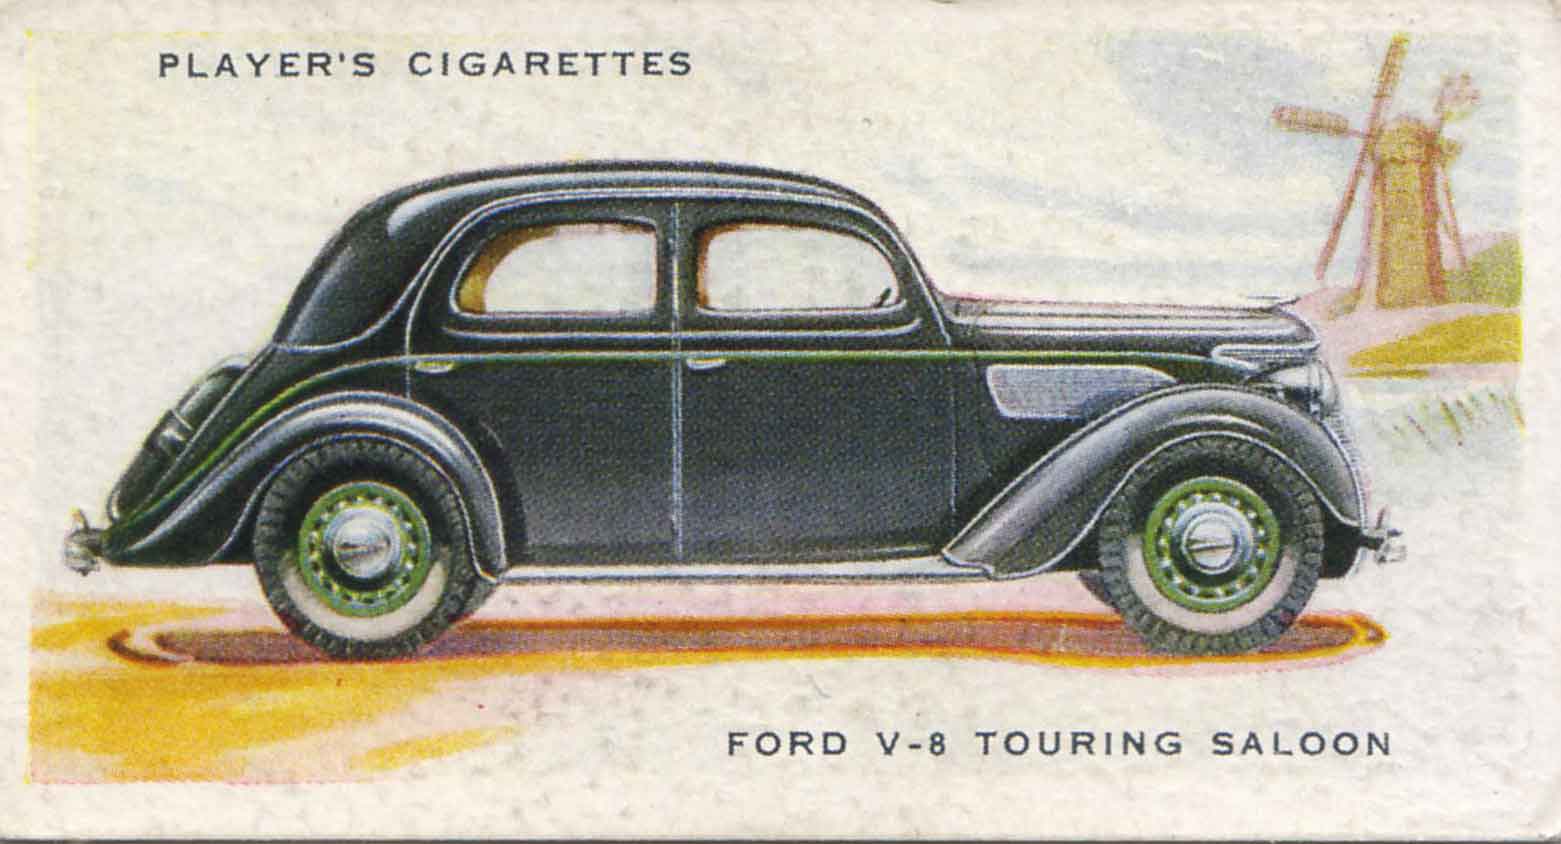 Ford V8-Touring Saloon. 1937 cigarette card.